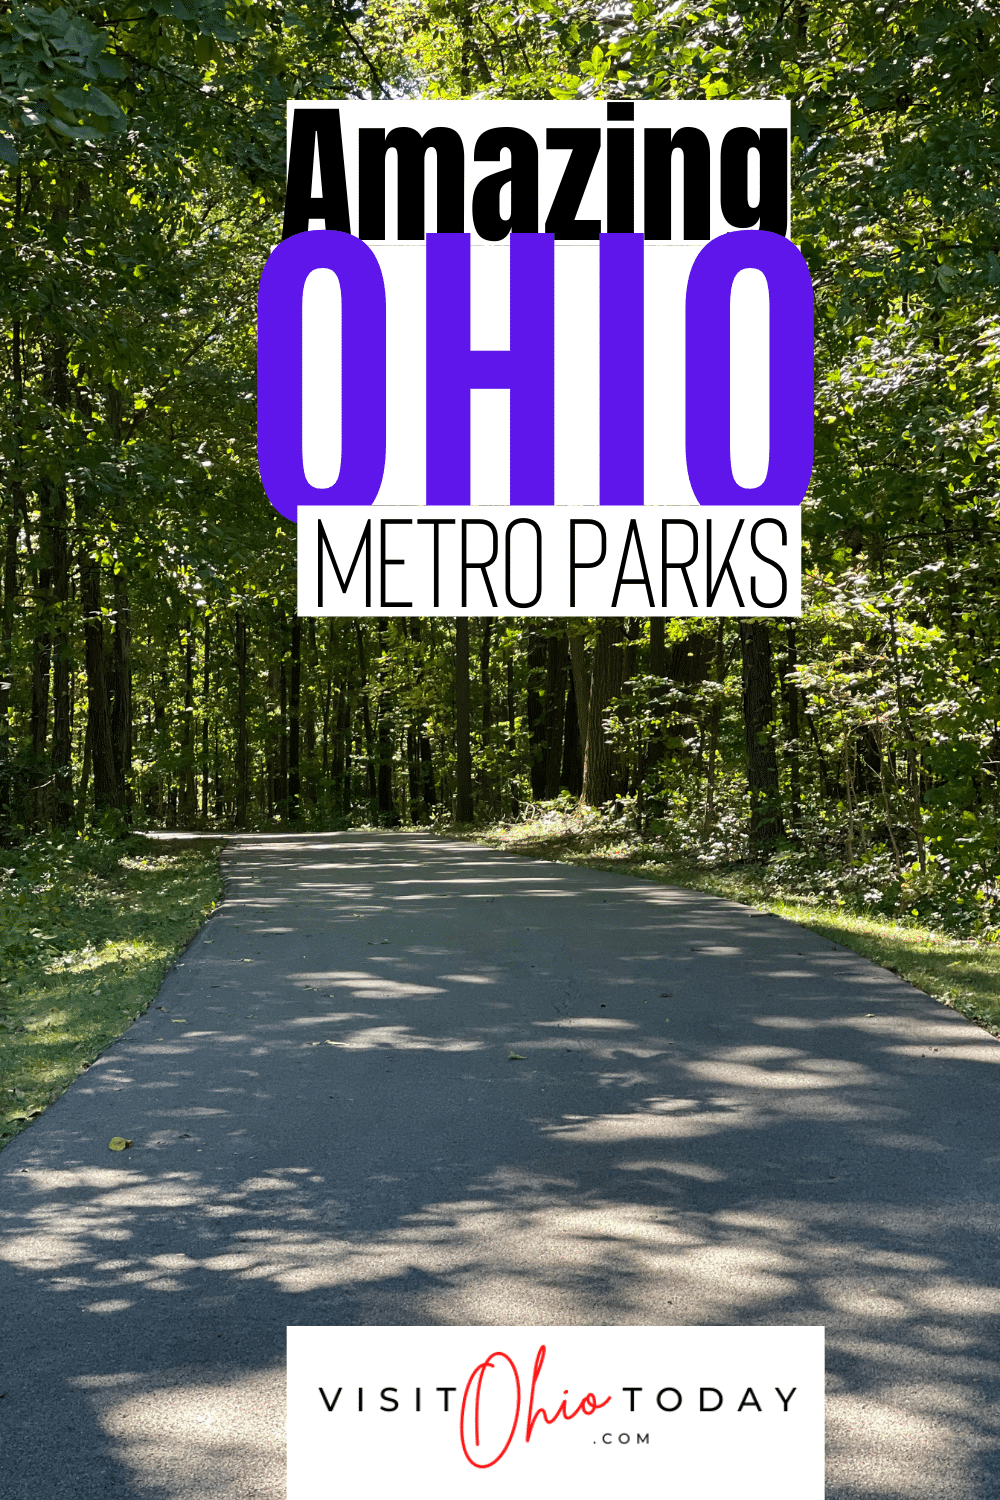 paved path leading into wooded area. Trees are brown with green leaves. Text: Amazing Ohio Metro Parks